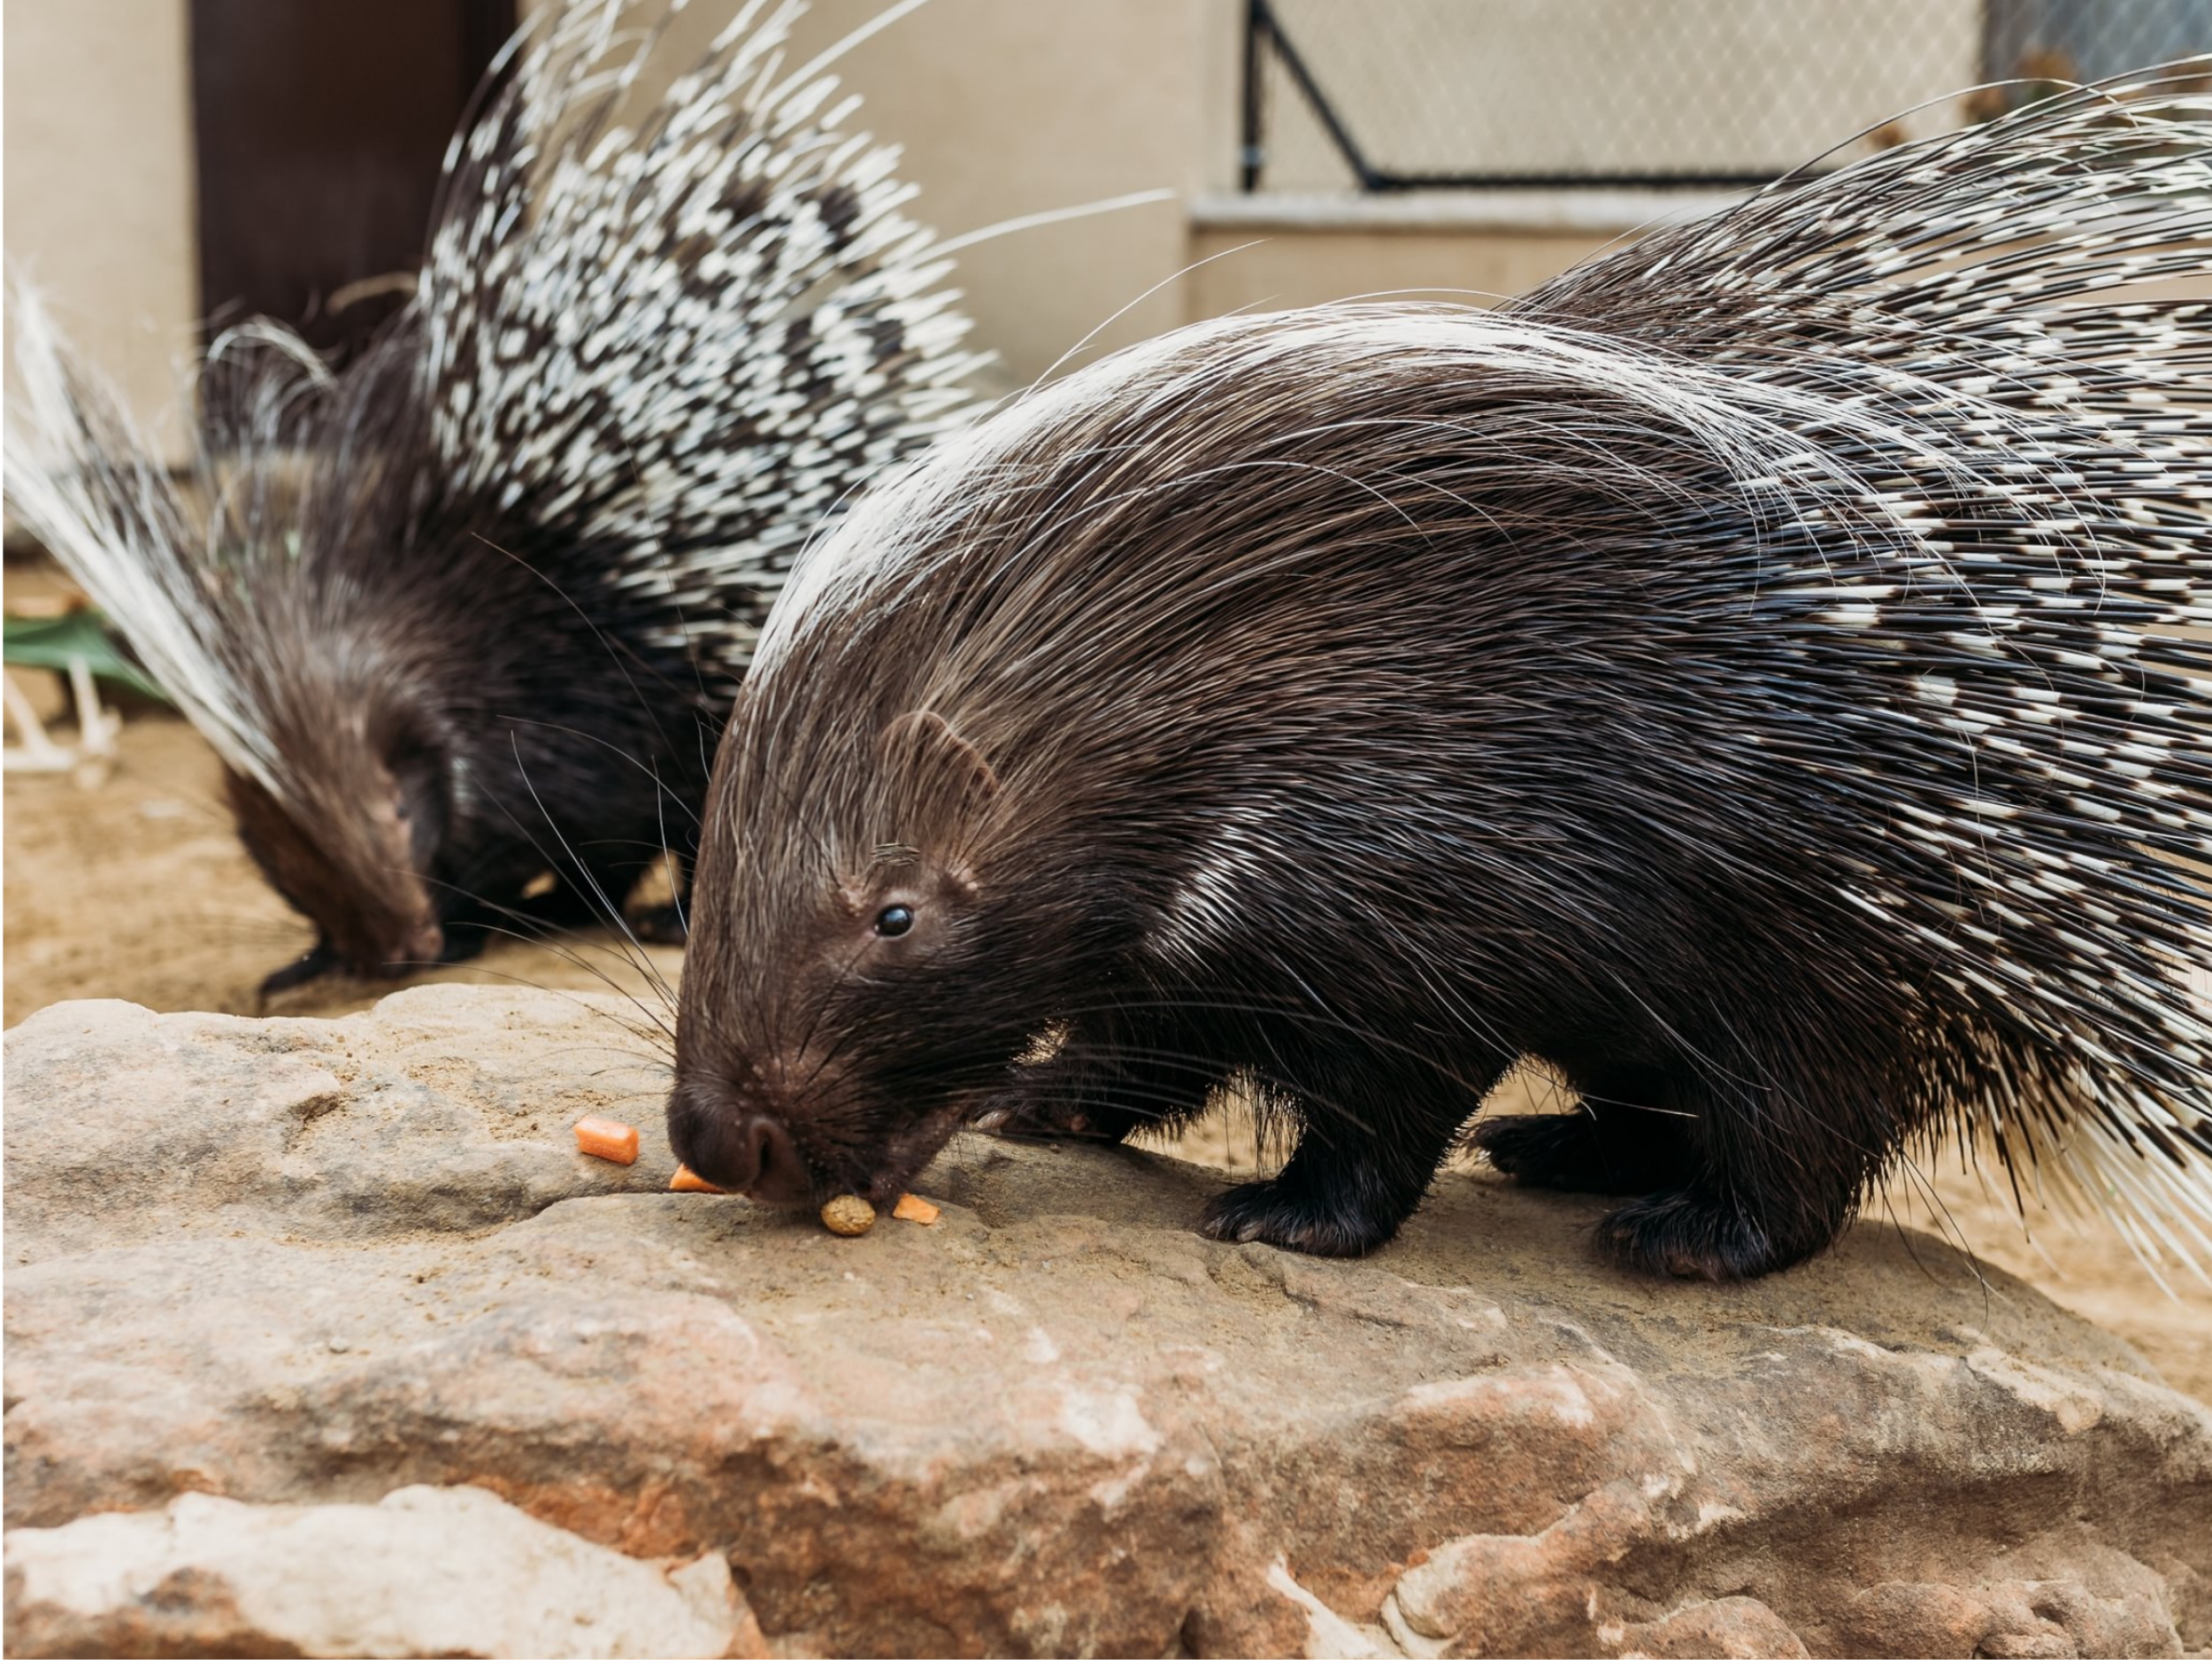 African Crested Porcupines